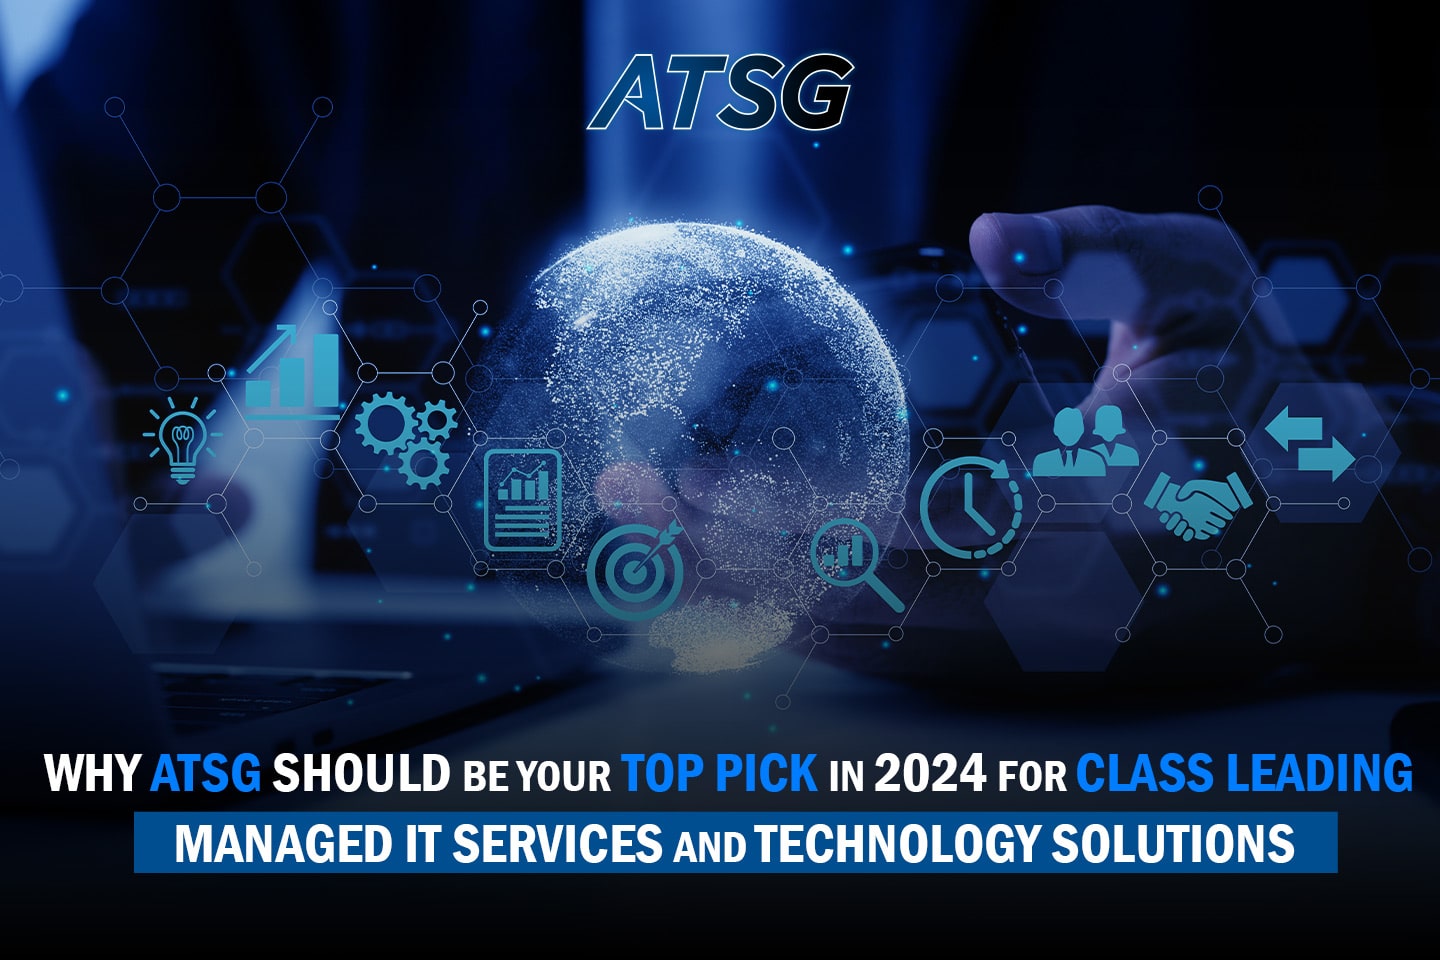 Why-ATSG-Should-be-Your-Top-Pick-in-2024-for-Class-Leading-Managed-IT-Services-and-Technology-Solutions-Featured